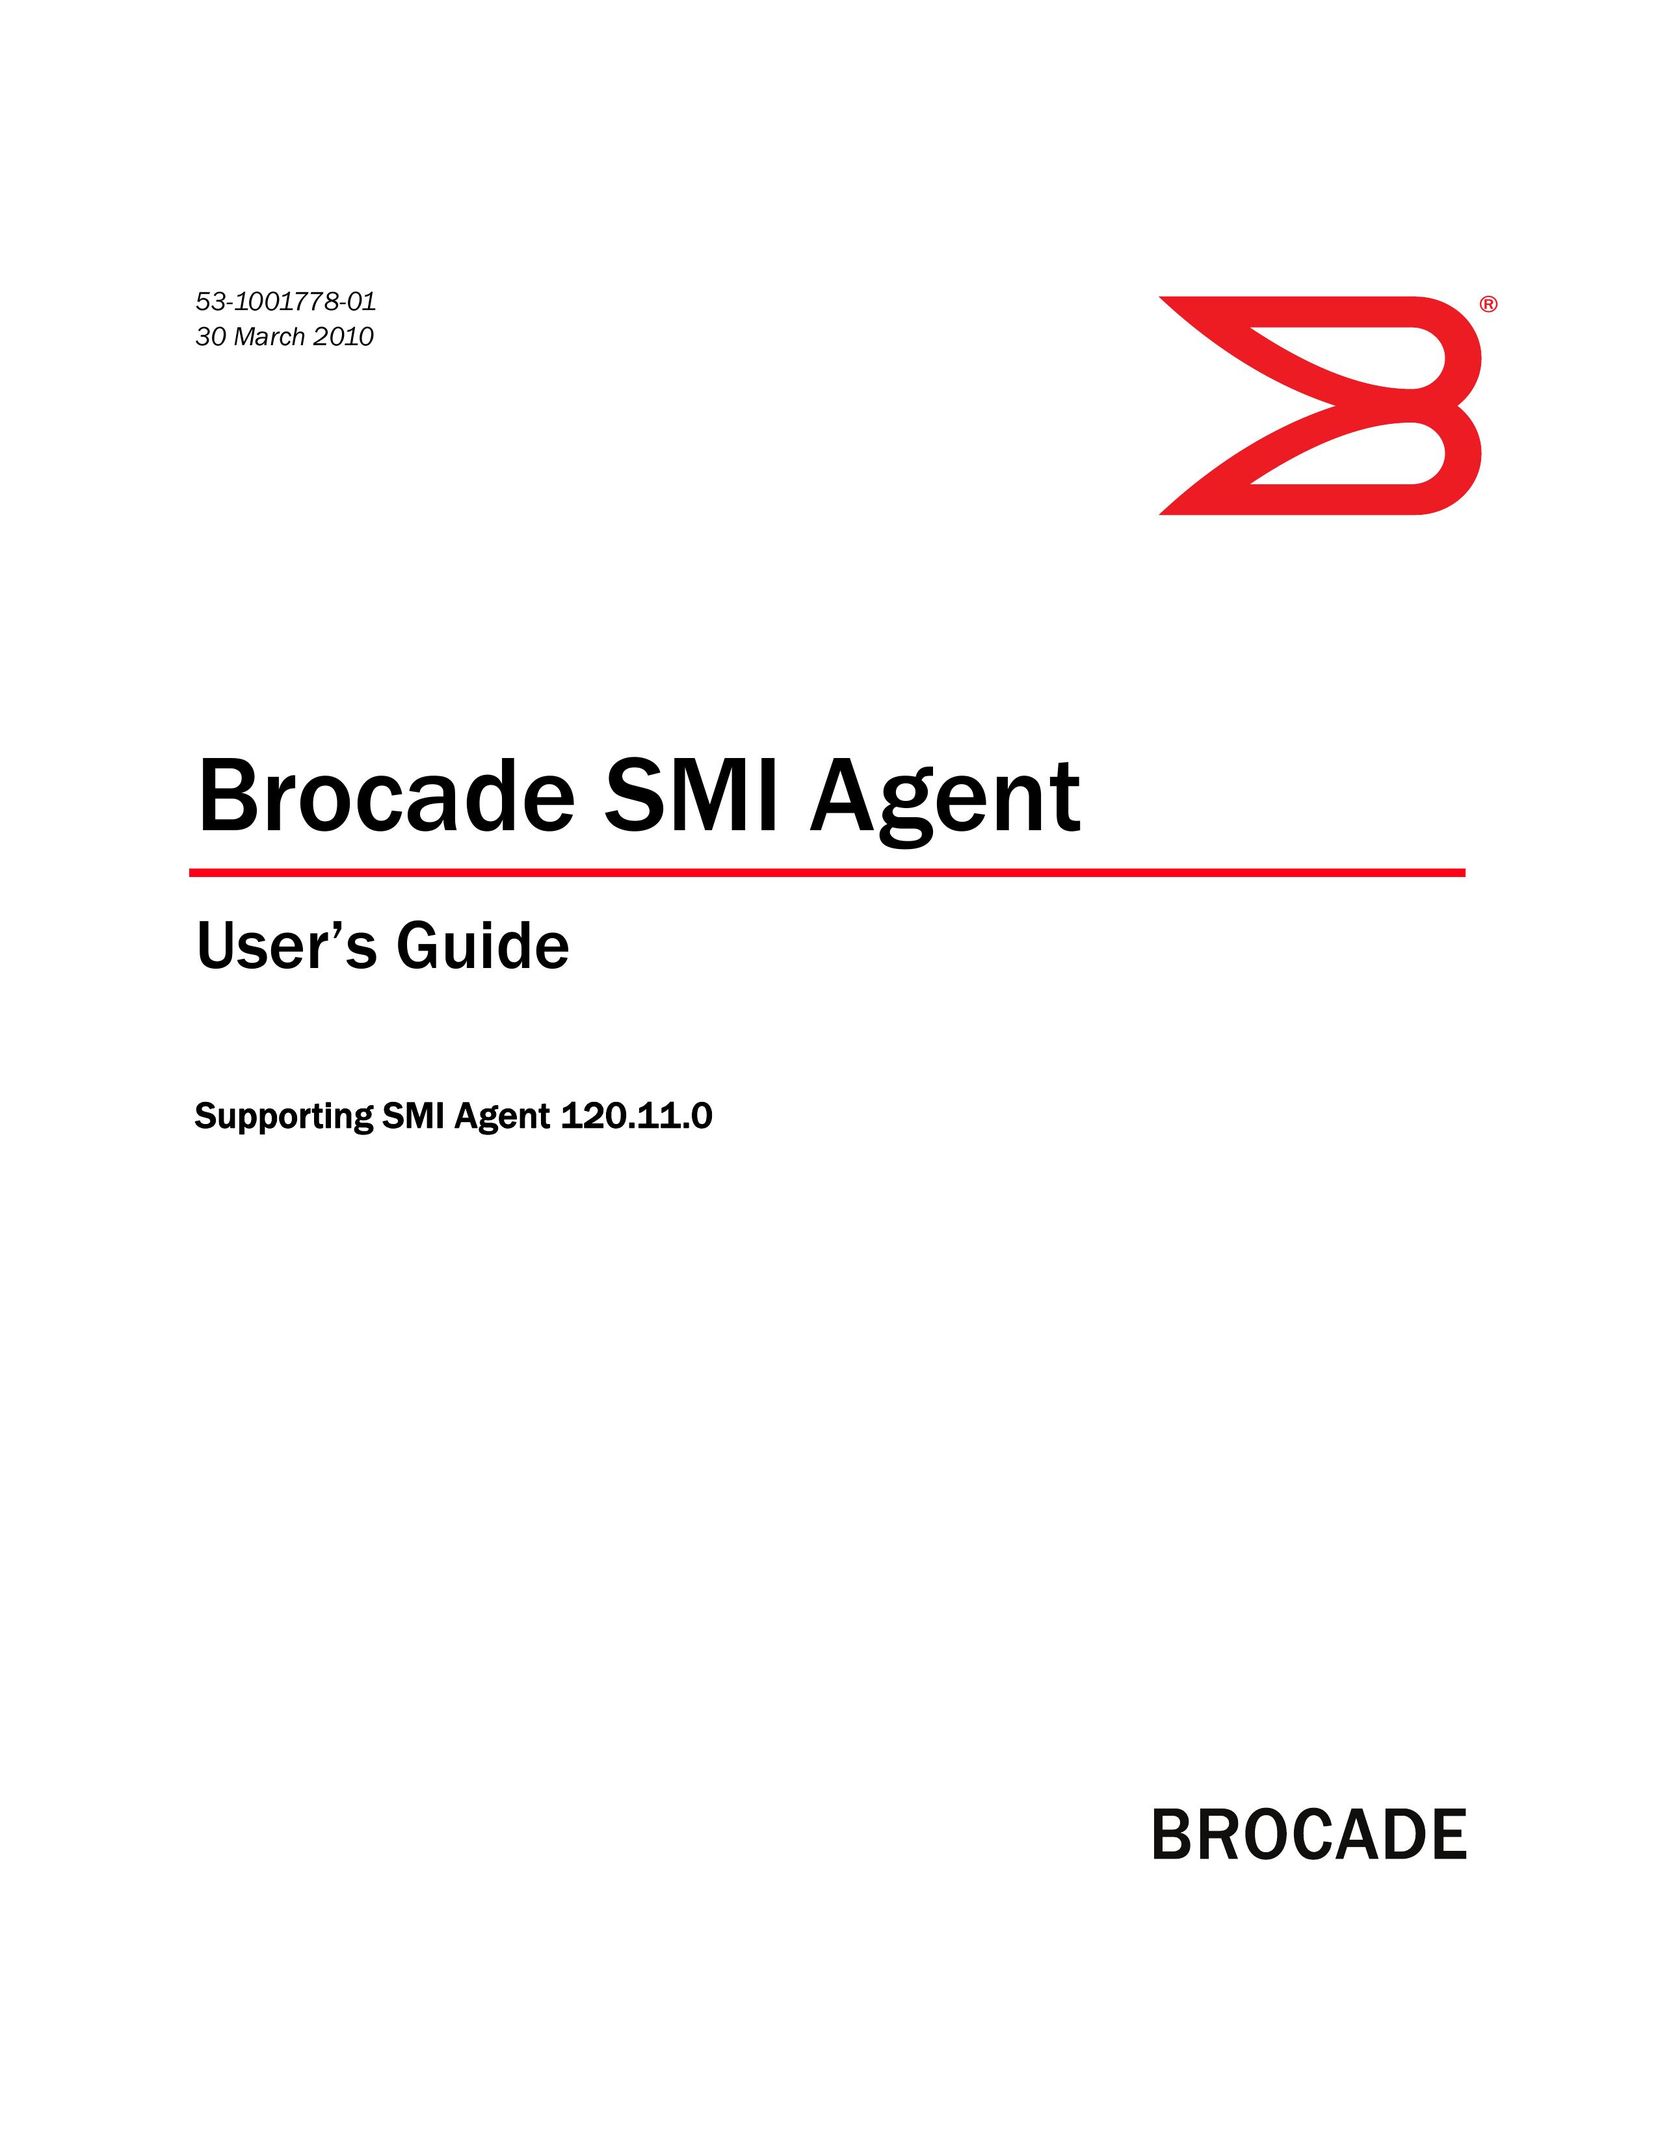 Brocade Communications Systems 53-1001778-01 Computer Accessories User Manual